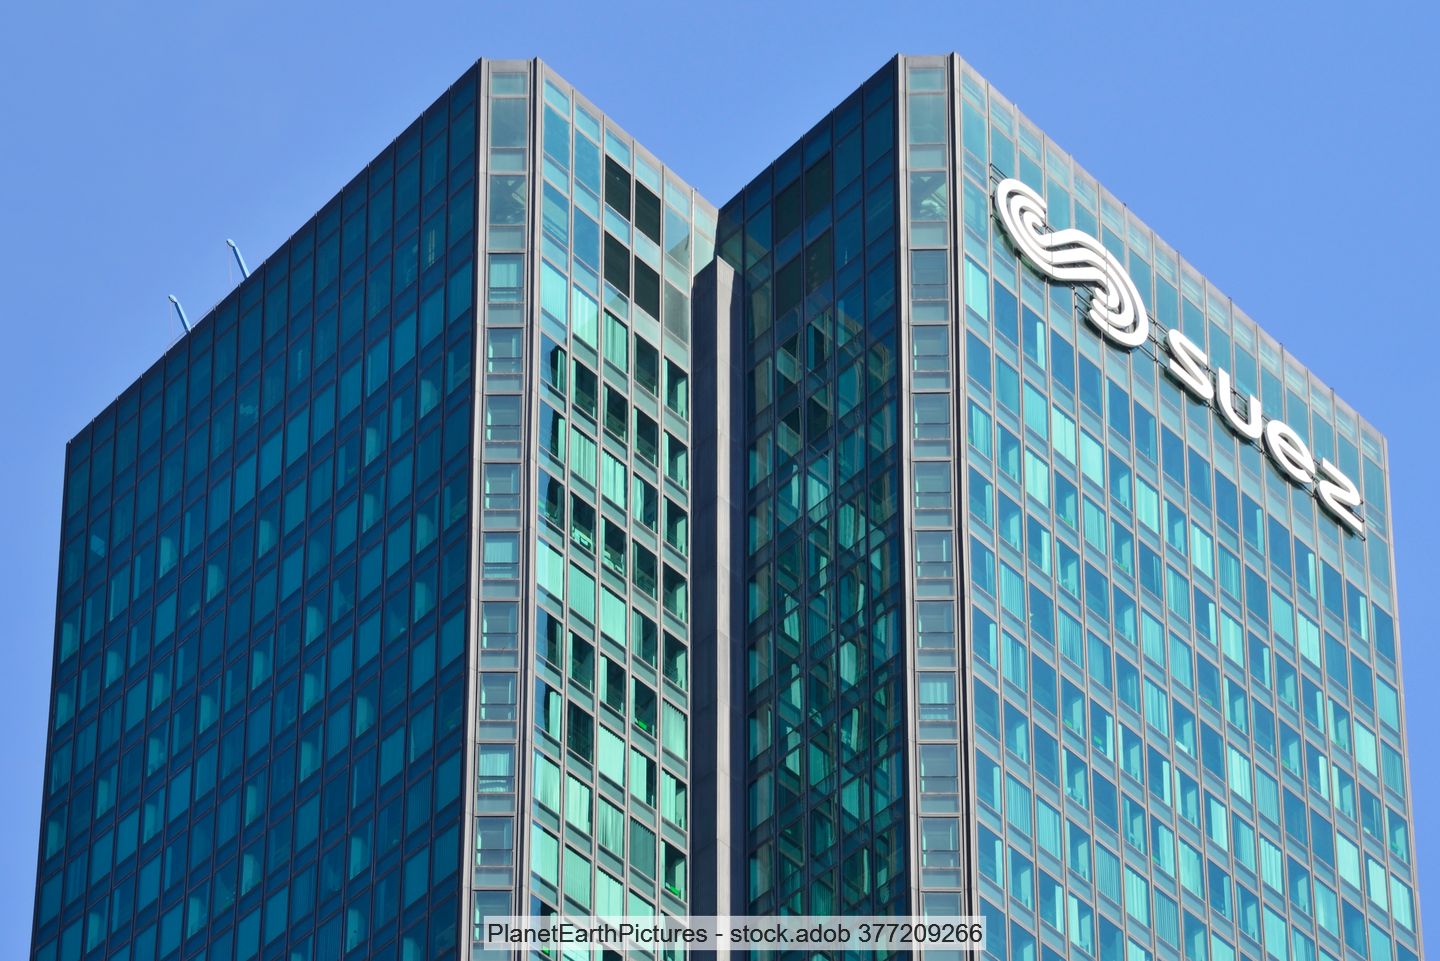 Photo of Suez's headquarters, an office tower bearing the company's logo in the La Défense district of Paris.